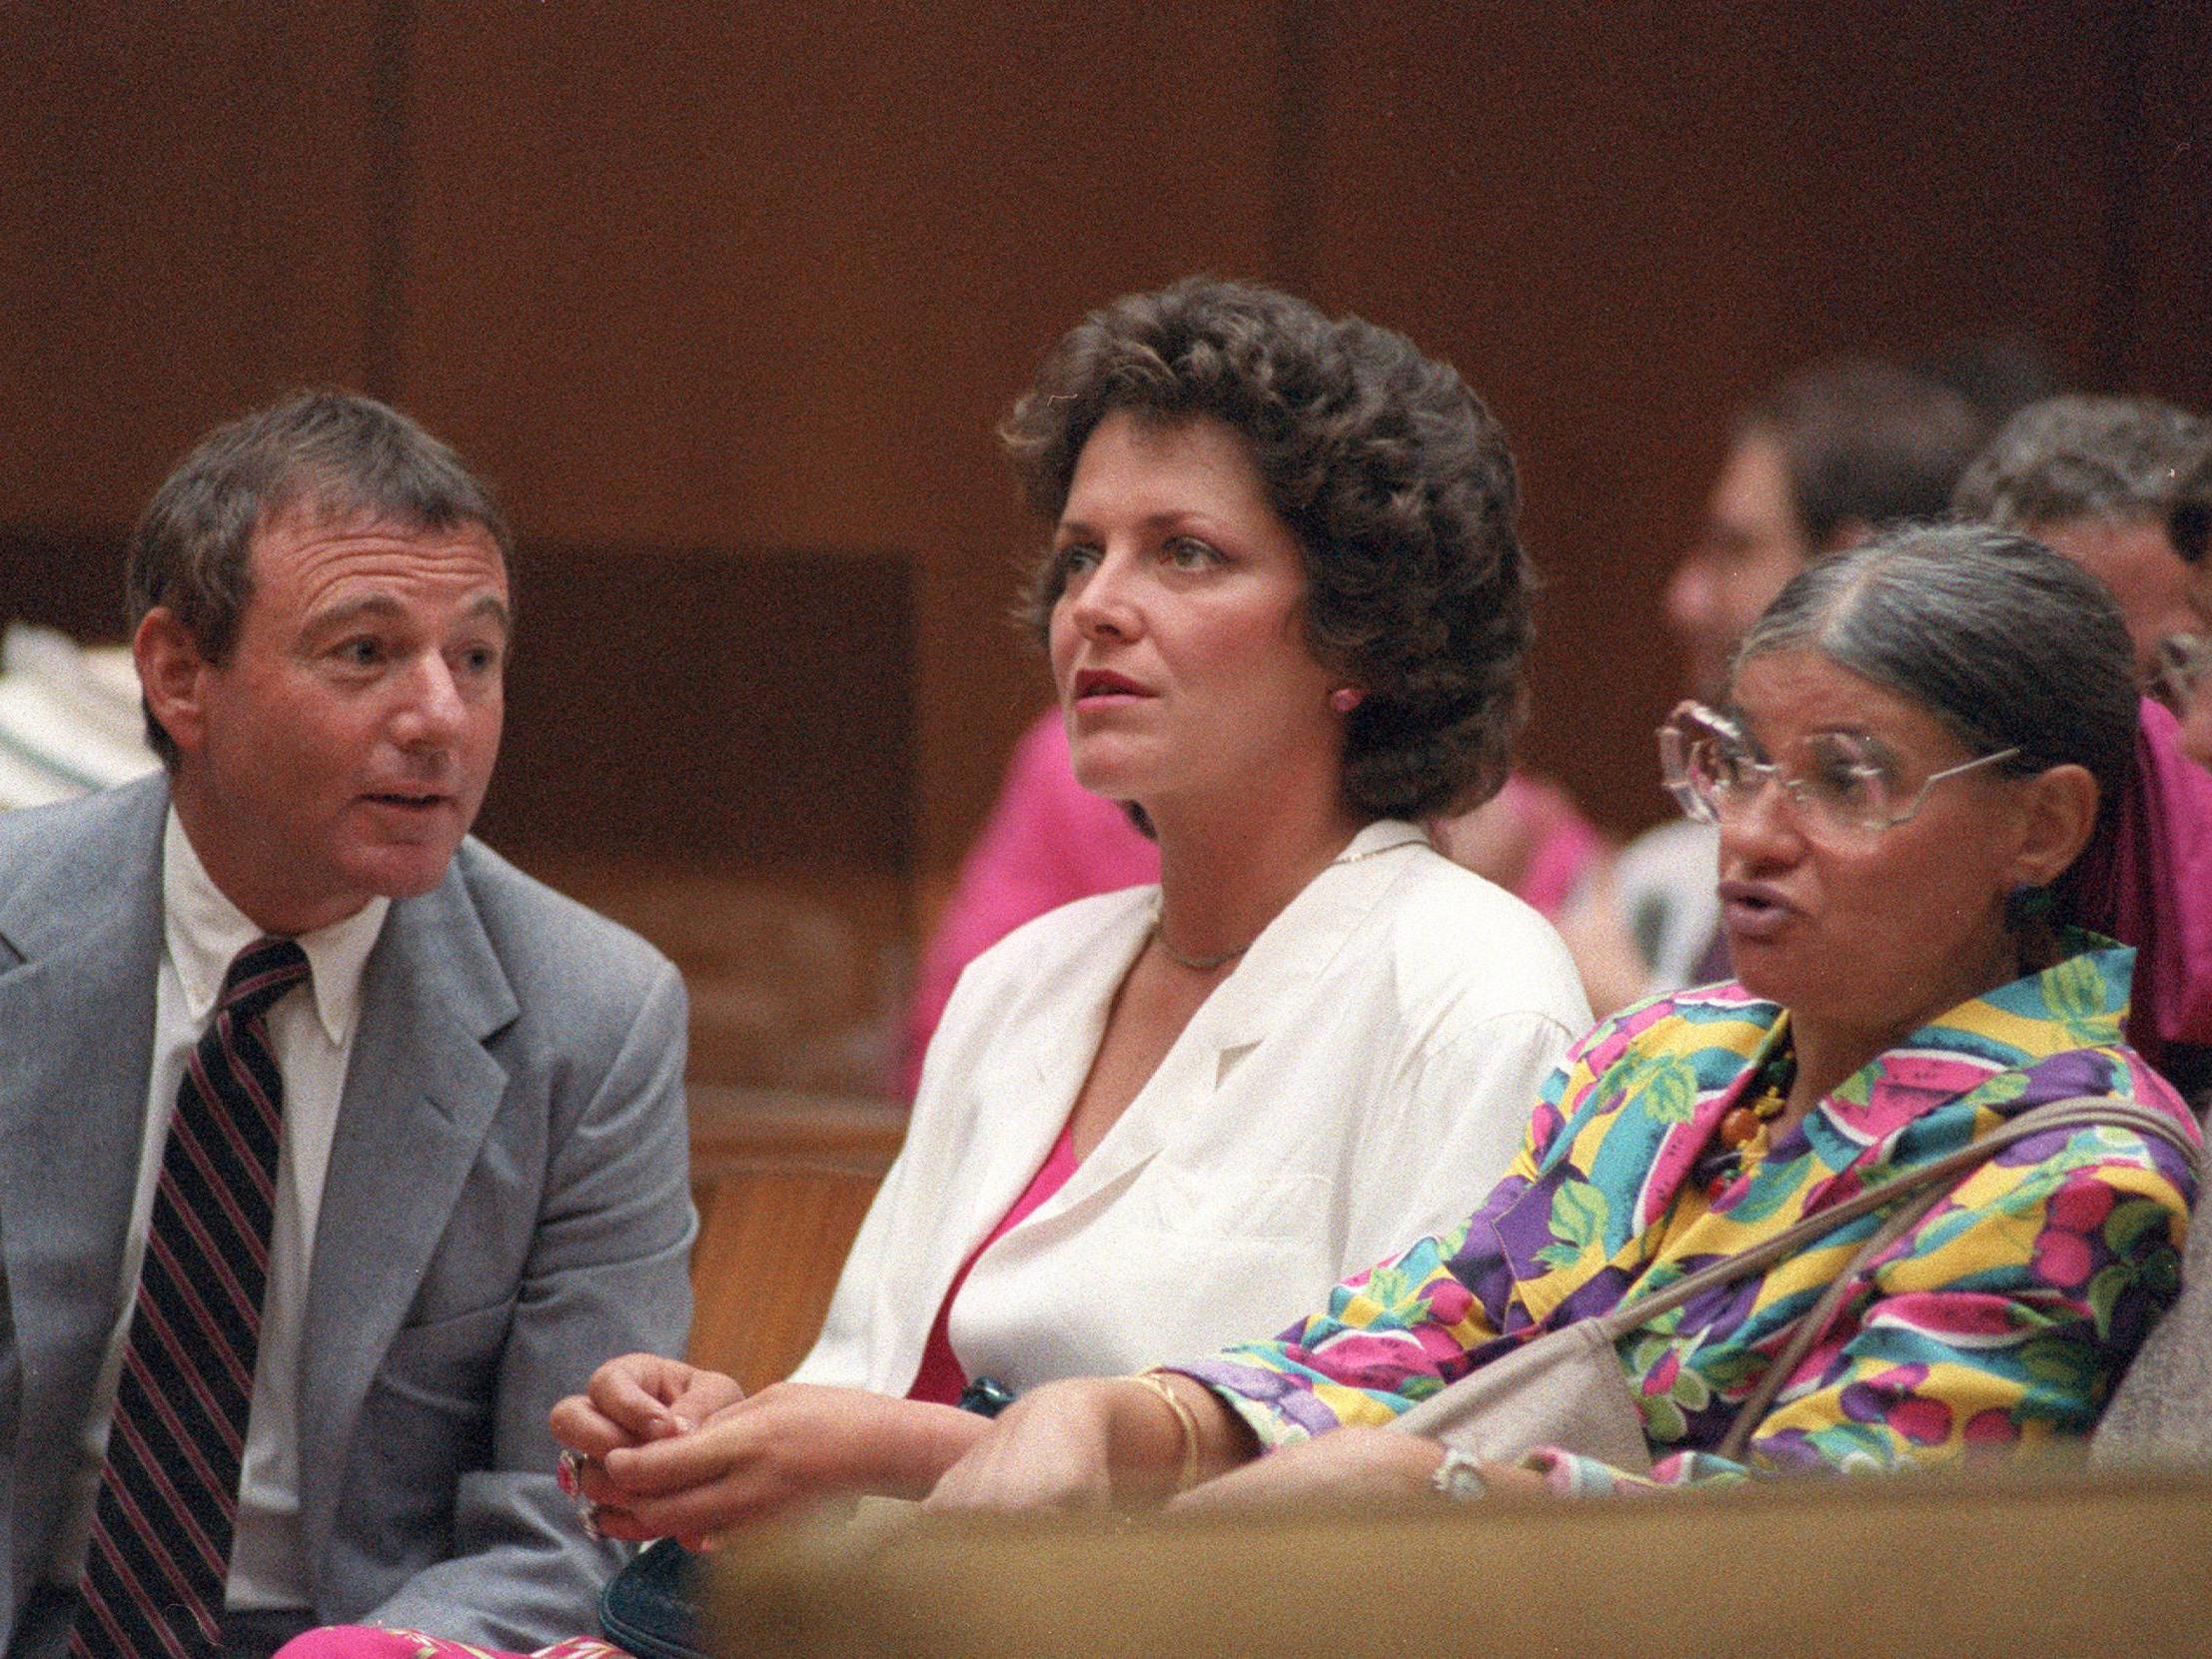 Cathy Smith and attorney Howard Weitzman pictured in court in 1986